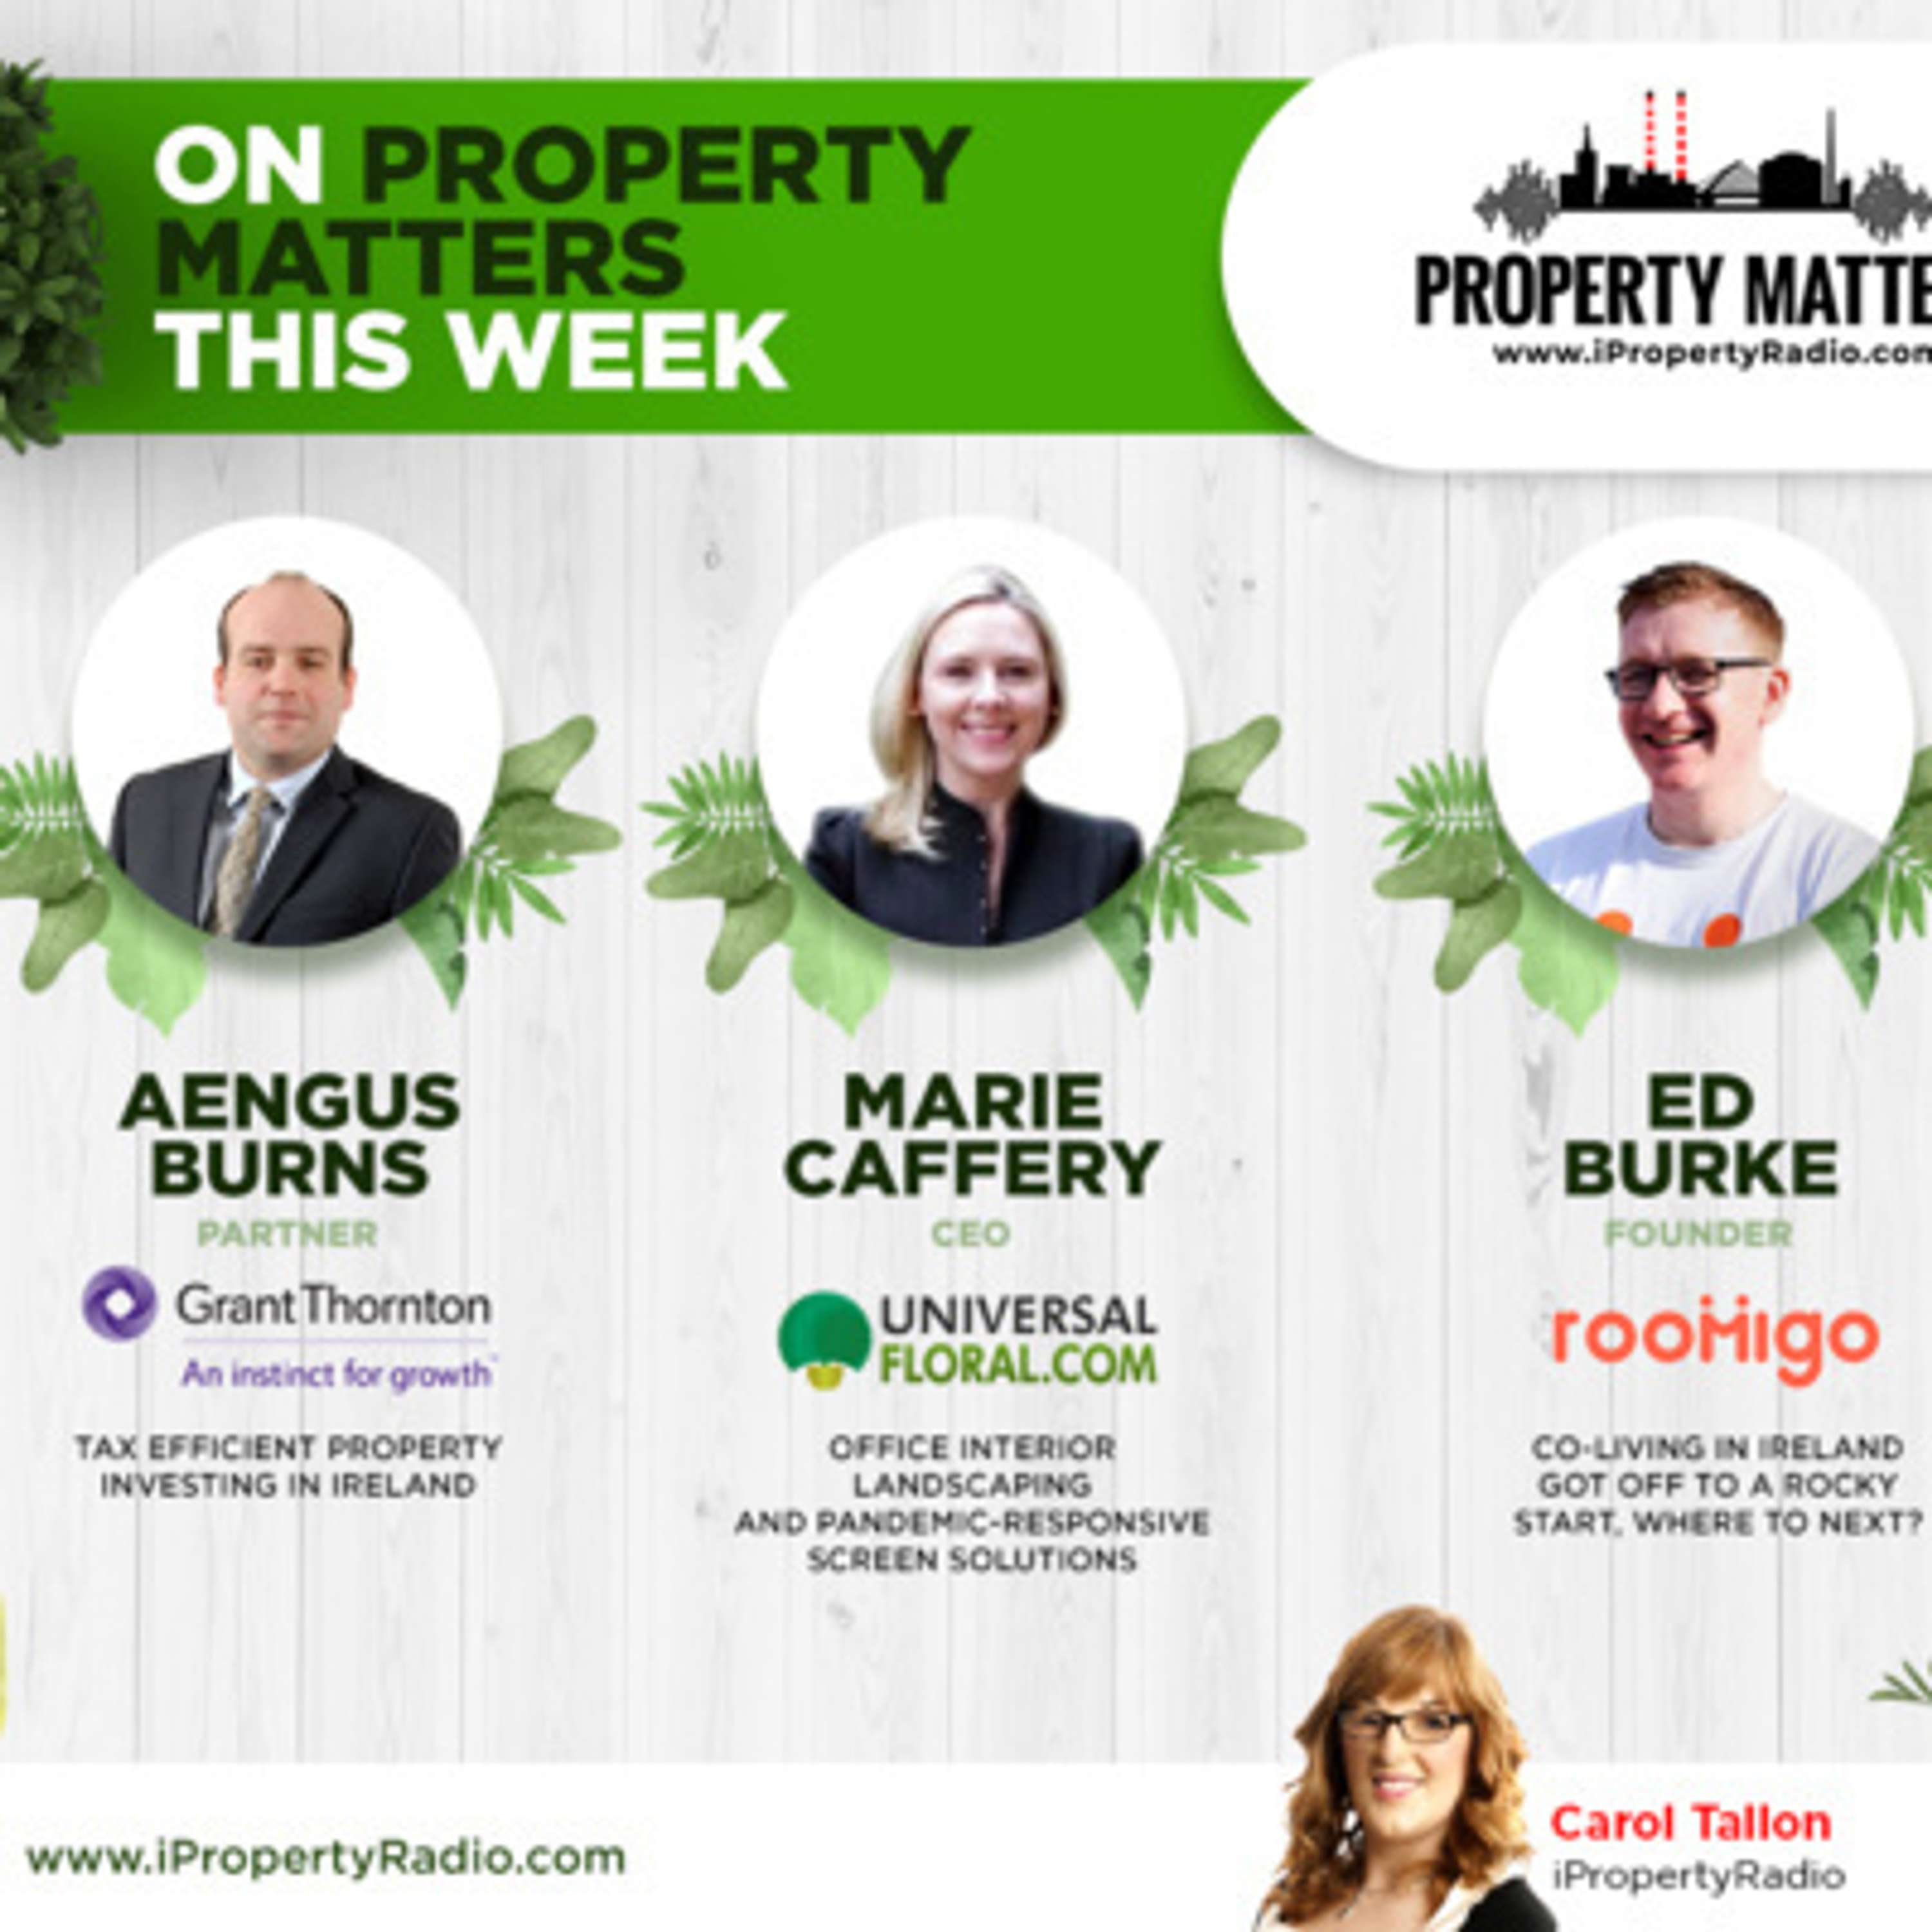 Ep.78 Property Matters, 16th June 2020: Tax, floral cutout & coliving